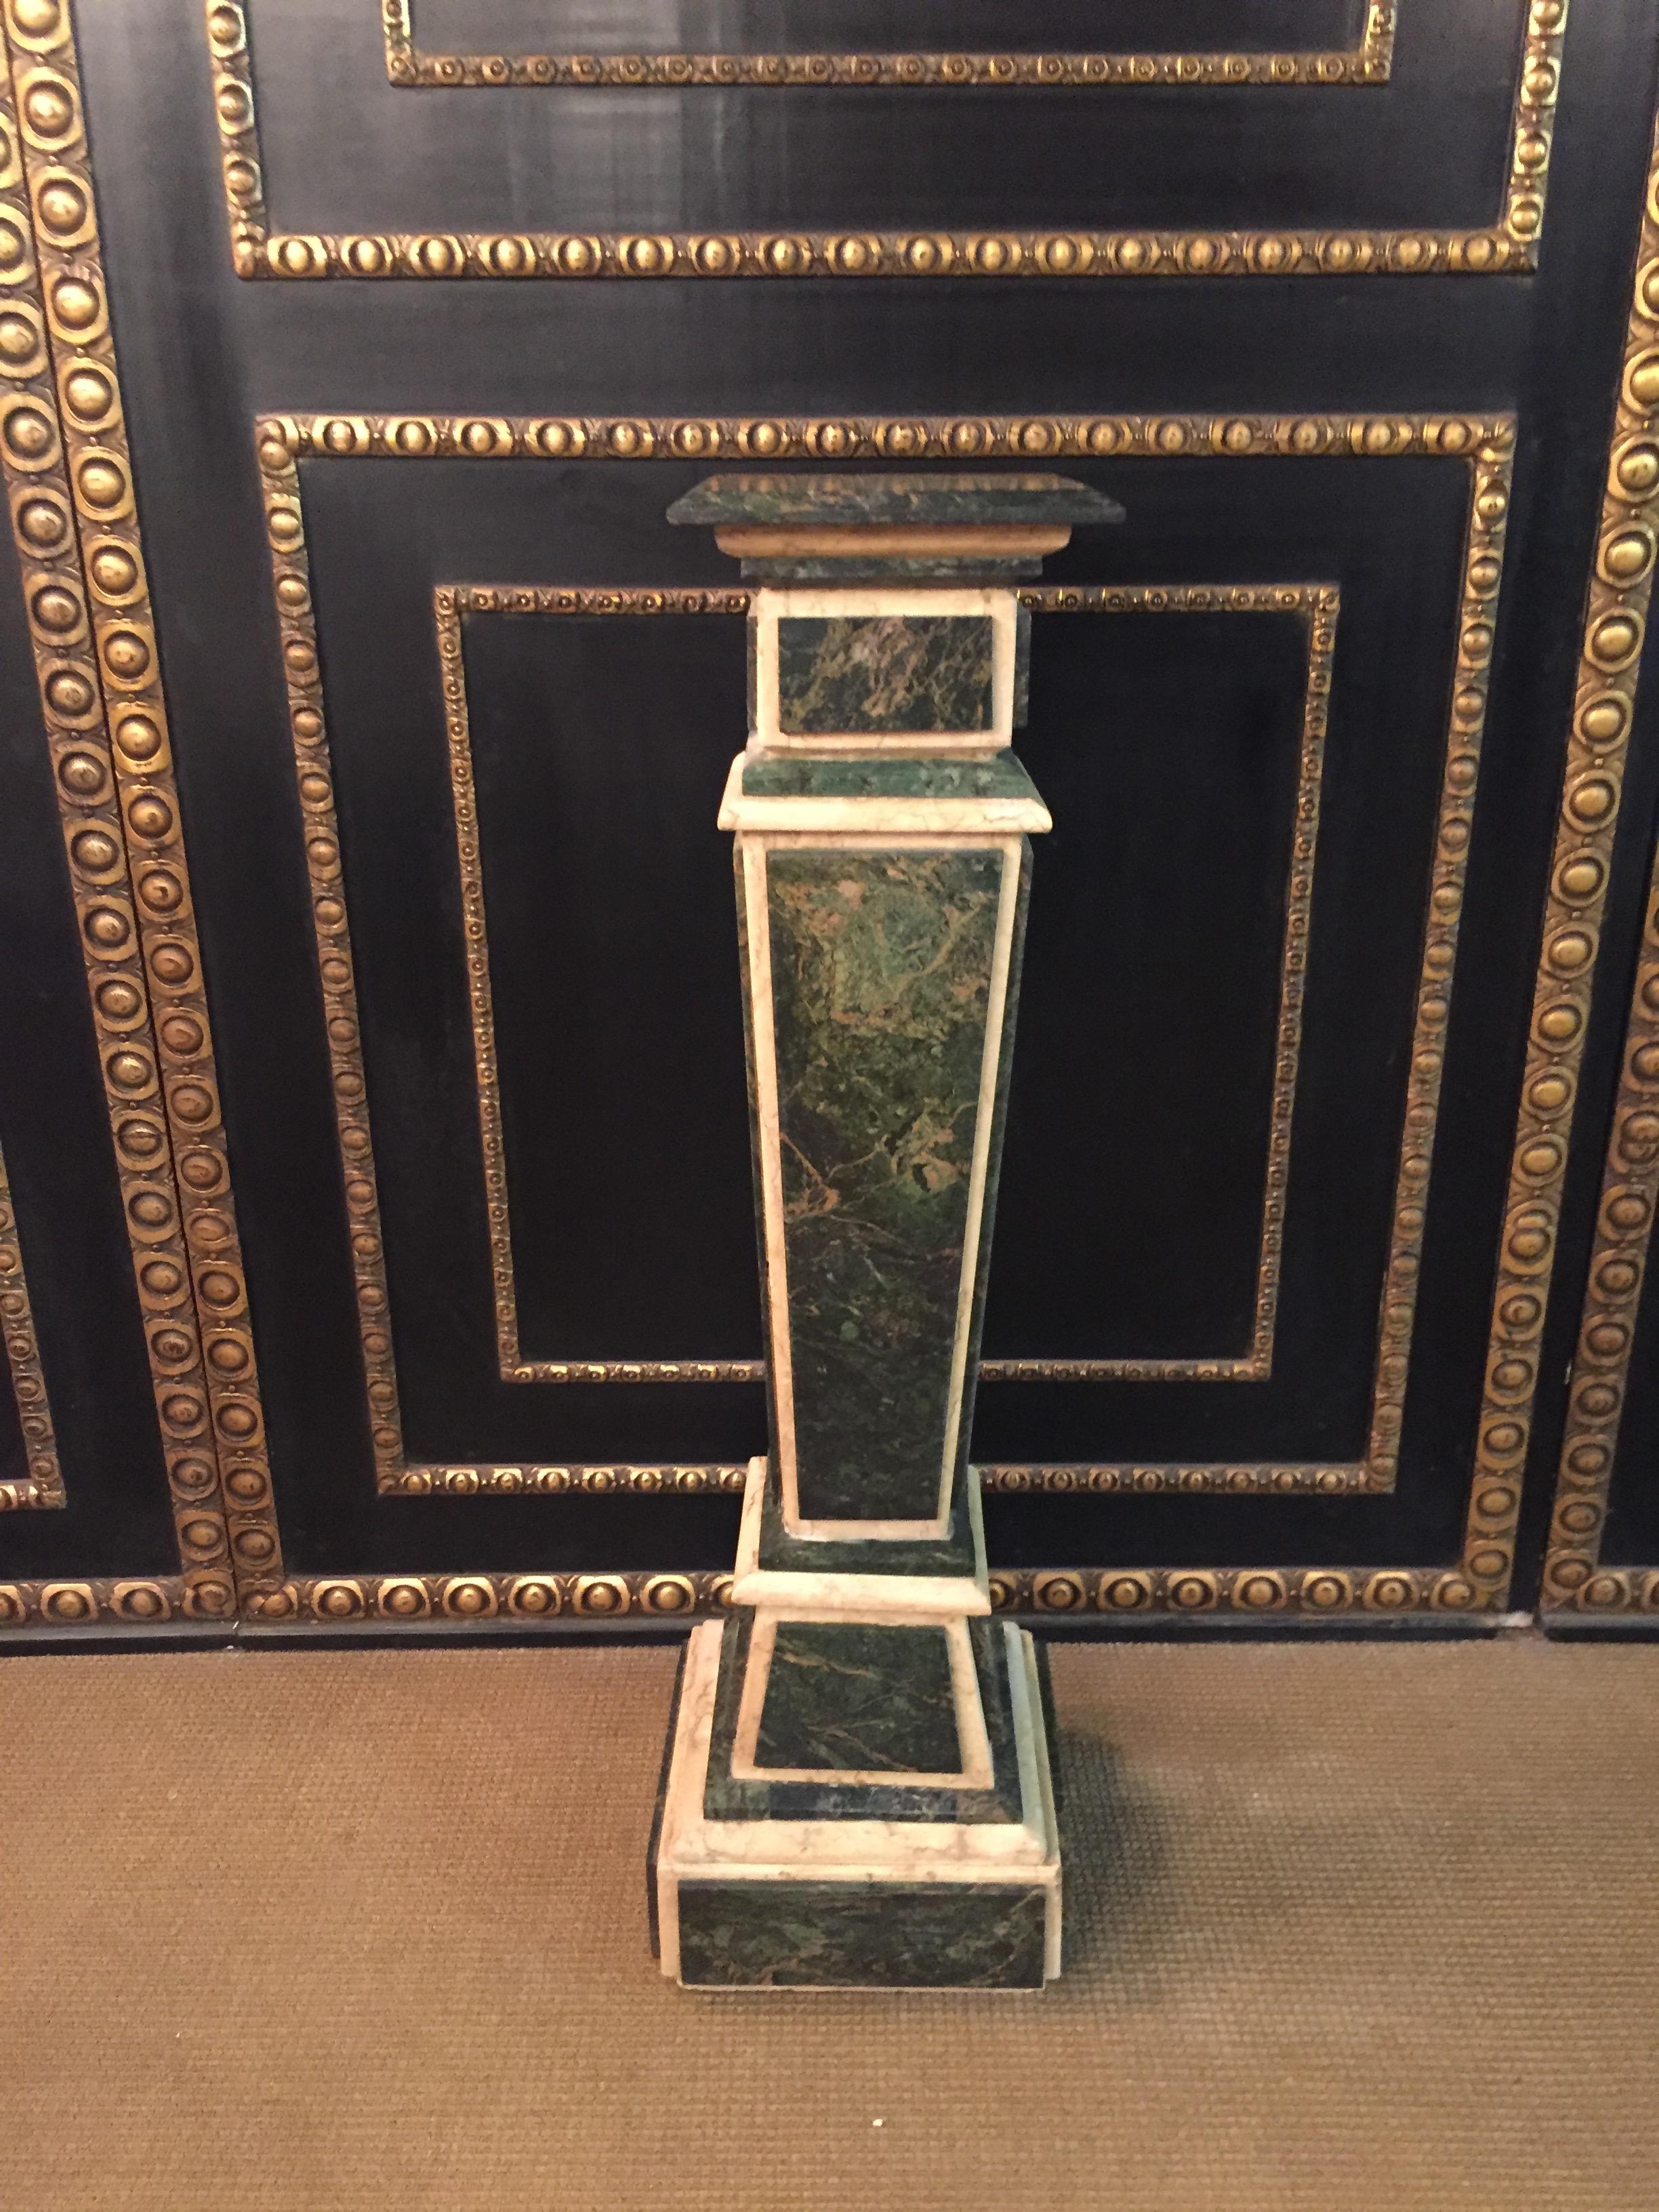 Green with gray-white mottled marble on beige marble body. Square Plinte on middle cassetiertem ascending Balusterschaft. Slightly protruding cover plate.